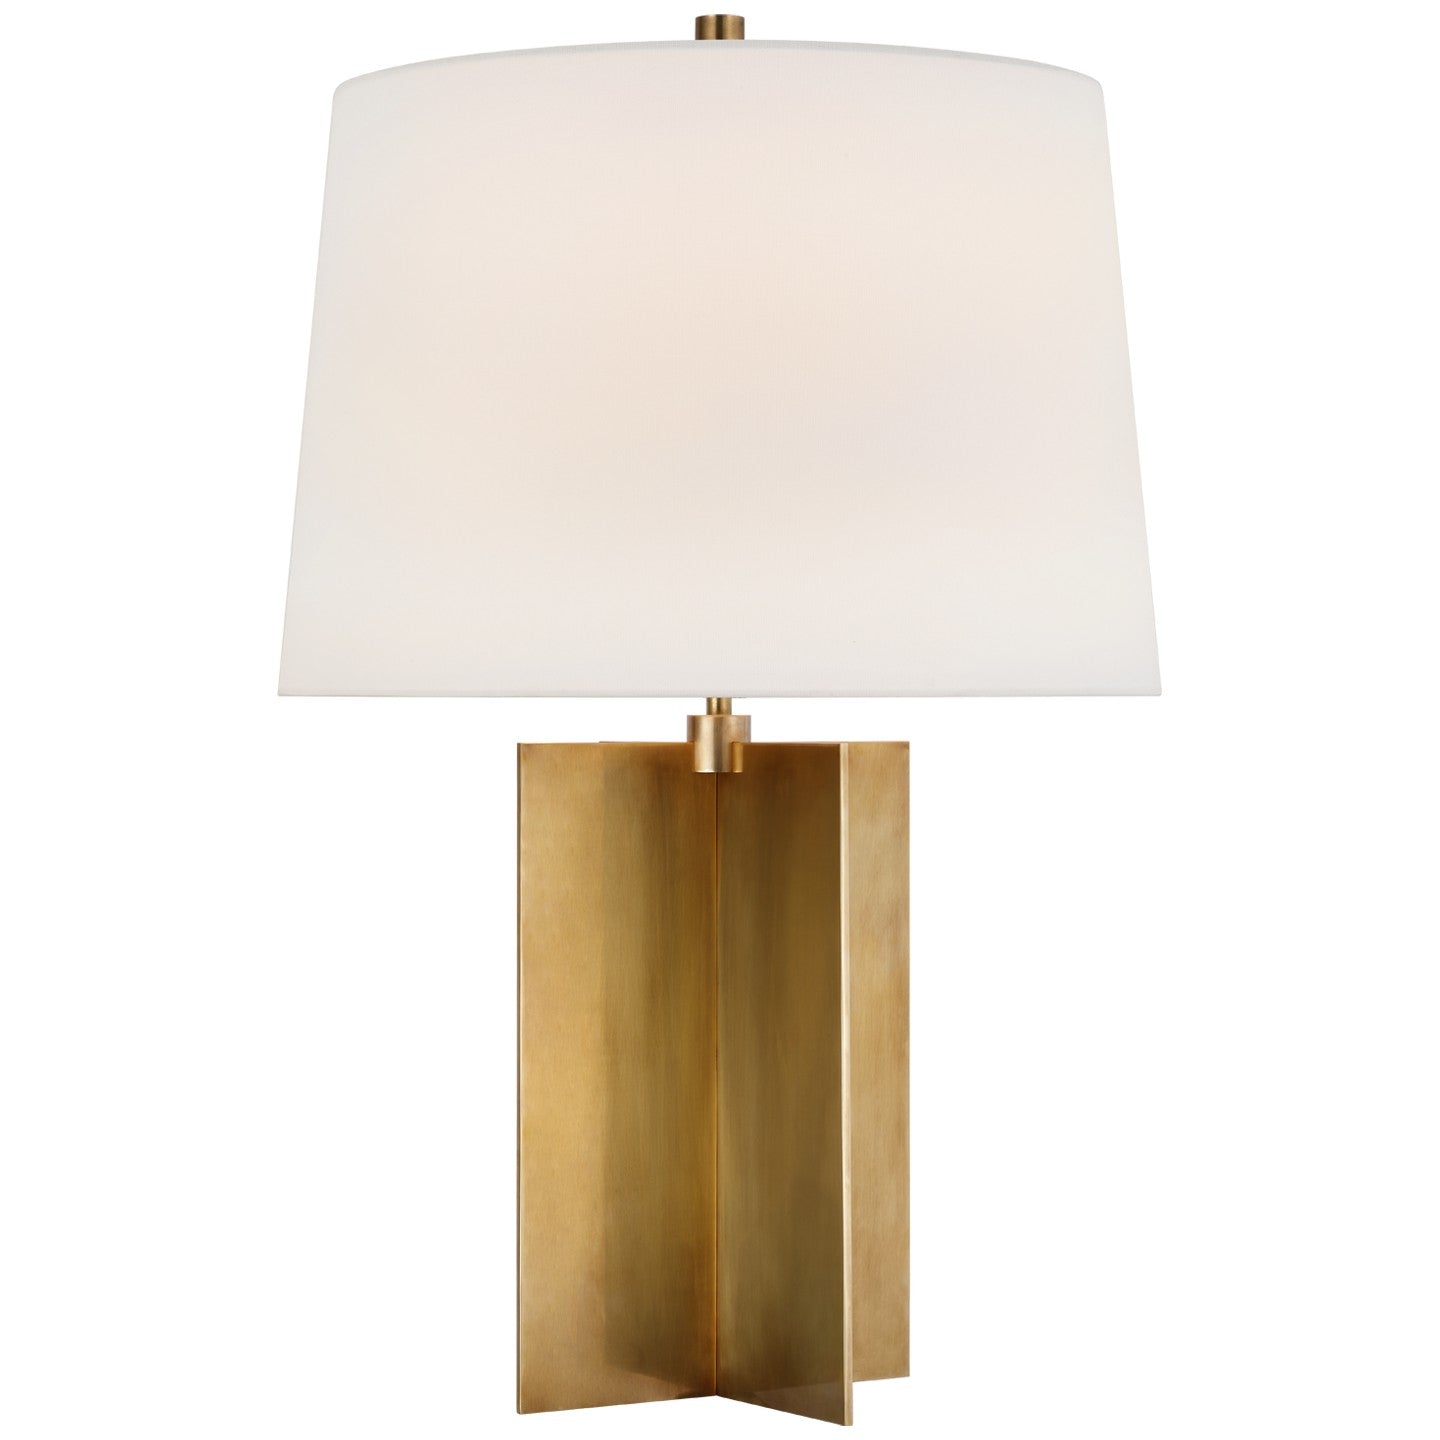 Visual Comfort Signature - PCD 3005HAB-L - LED Table Lamp - Costes - Hand-Rubbed Antique Brass